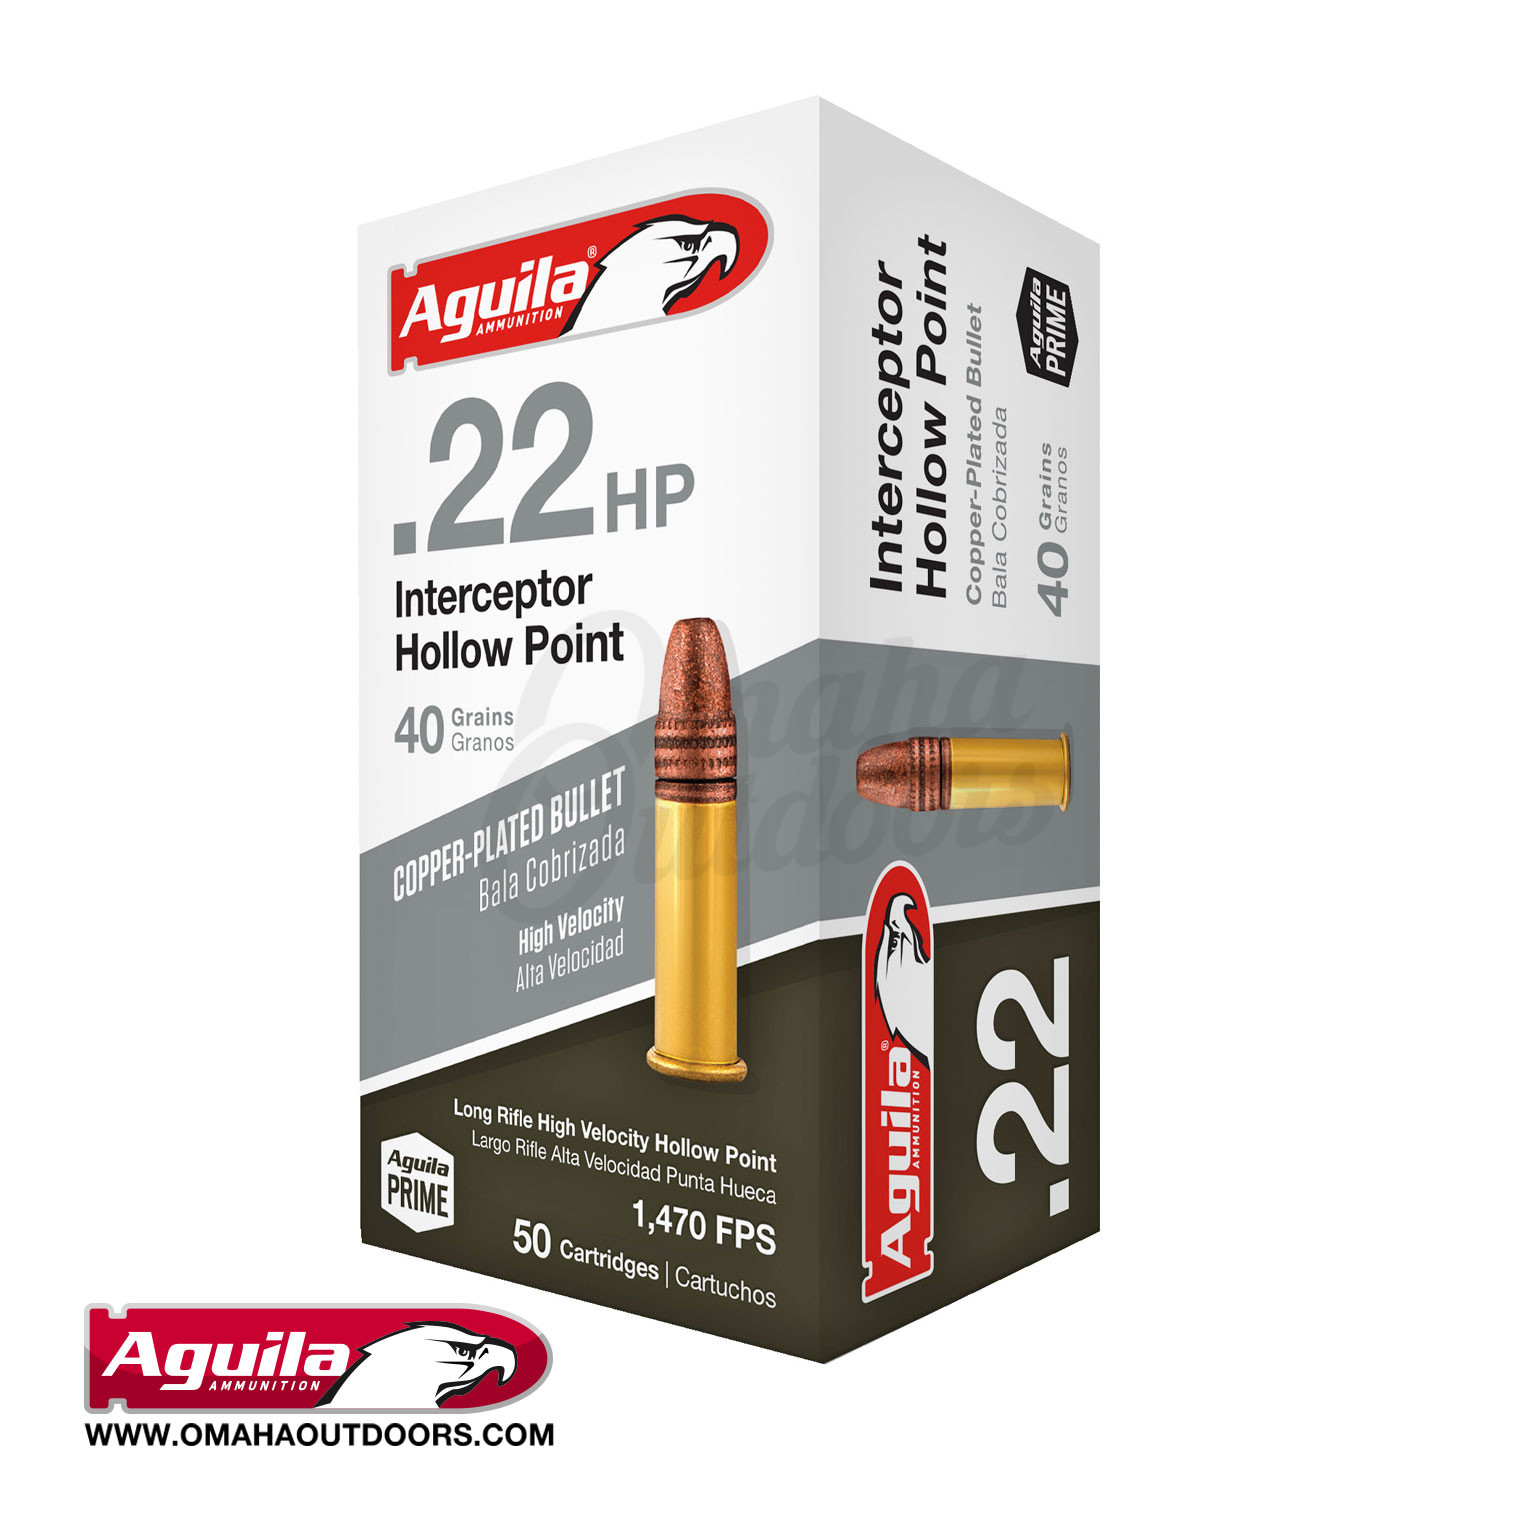 Aguila 22LR Interceptor 40 Grain Hollow Point 50 Rounds - In Stock